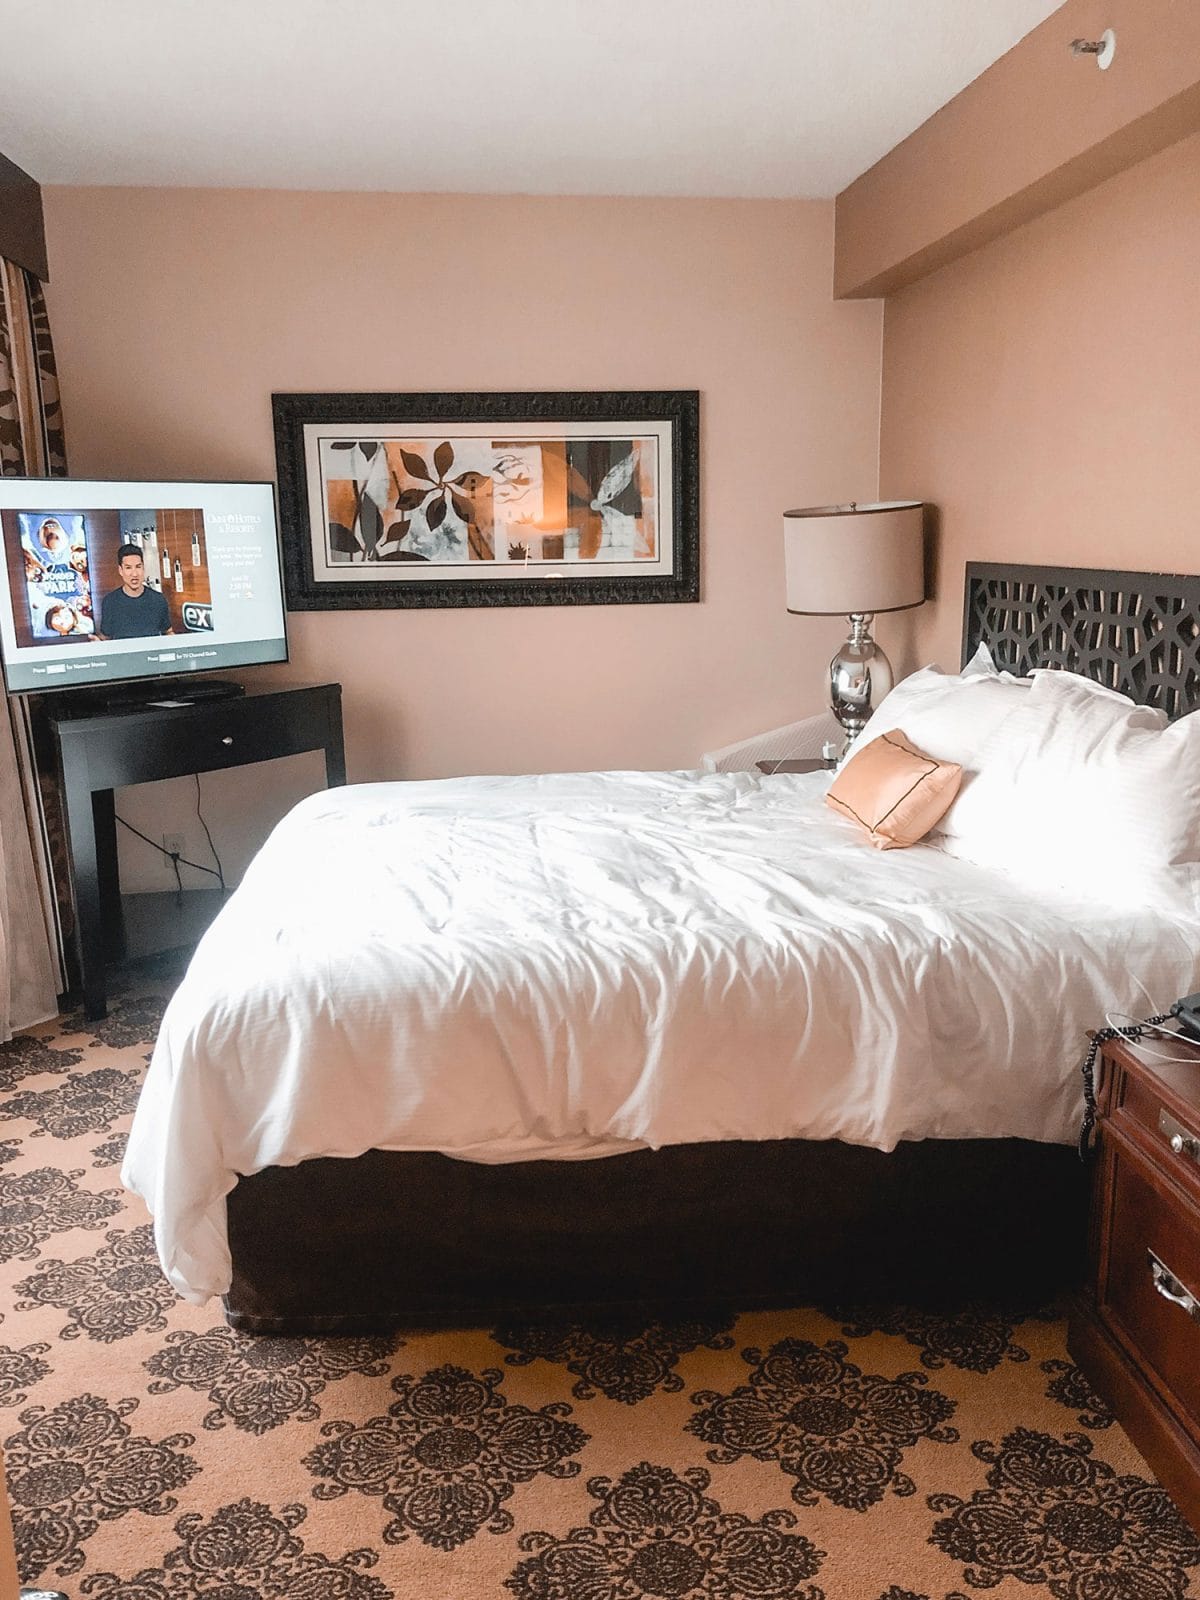 Houston blogger Meg O. on the Go shares her staycation at the Omni Houston Hotel - king suite